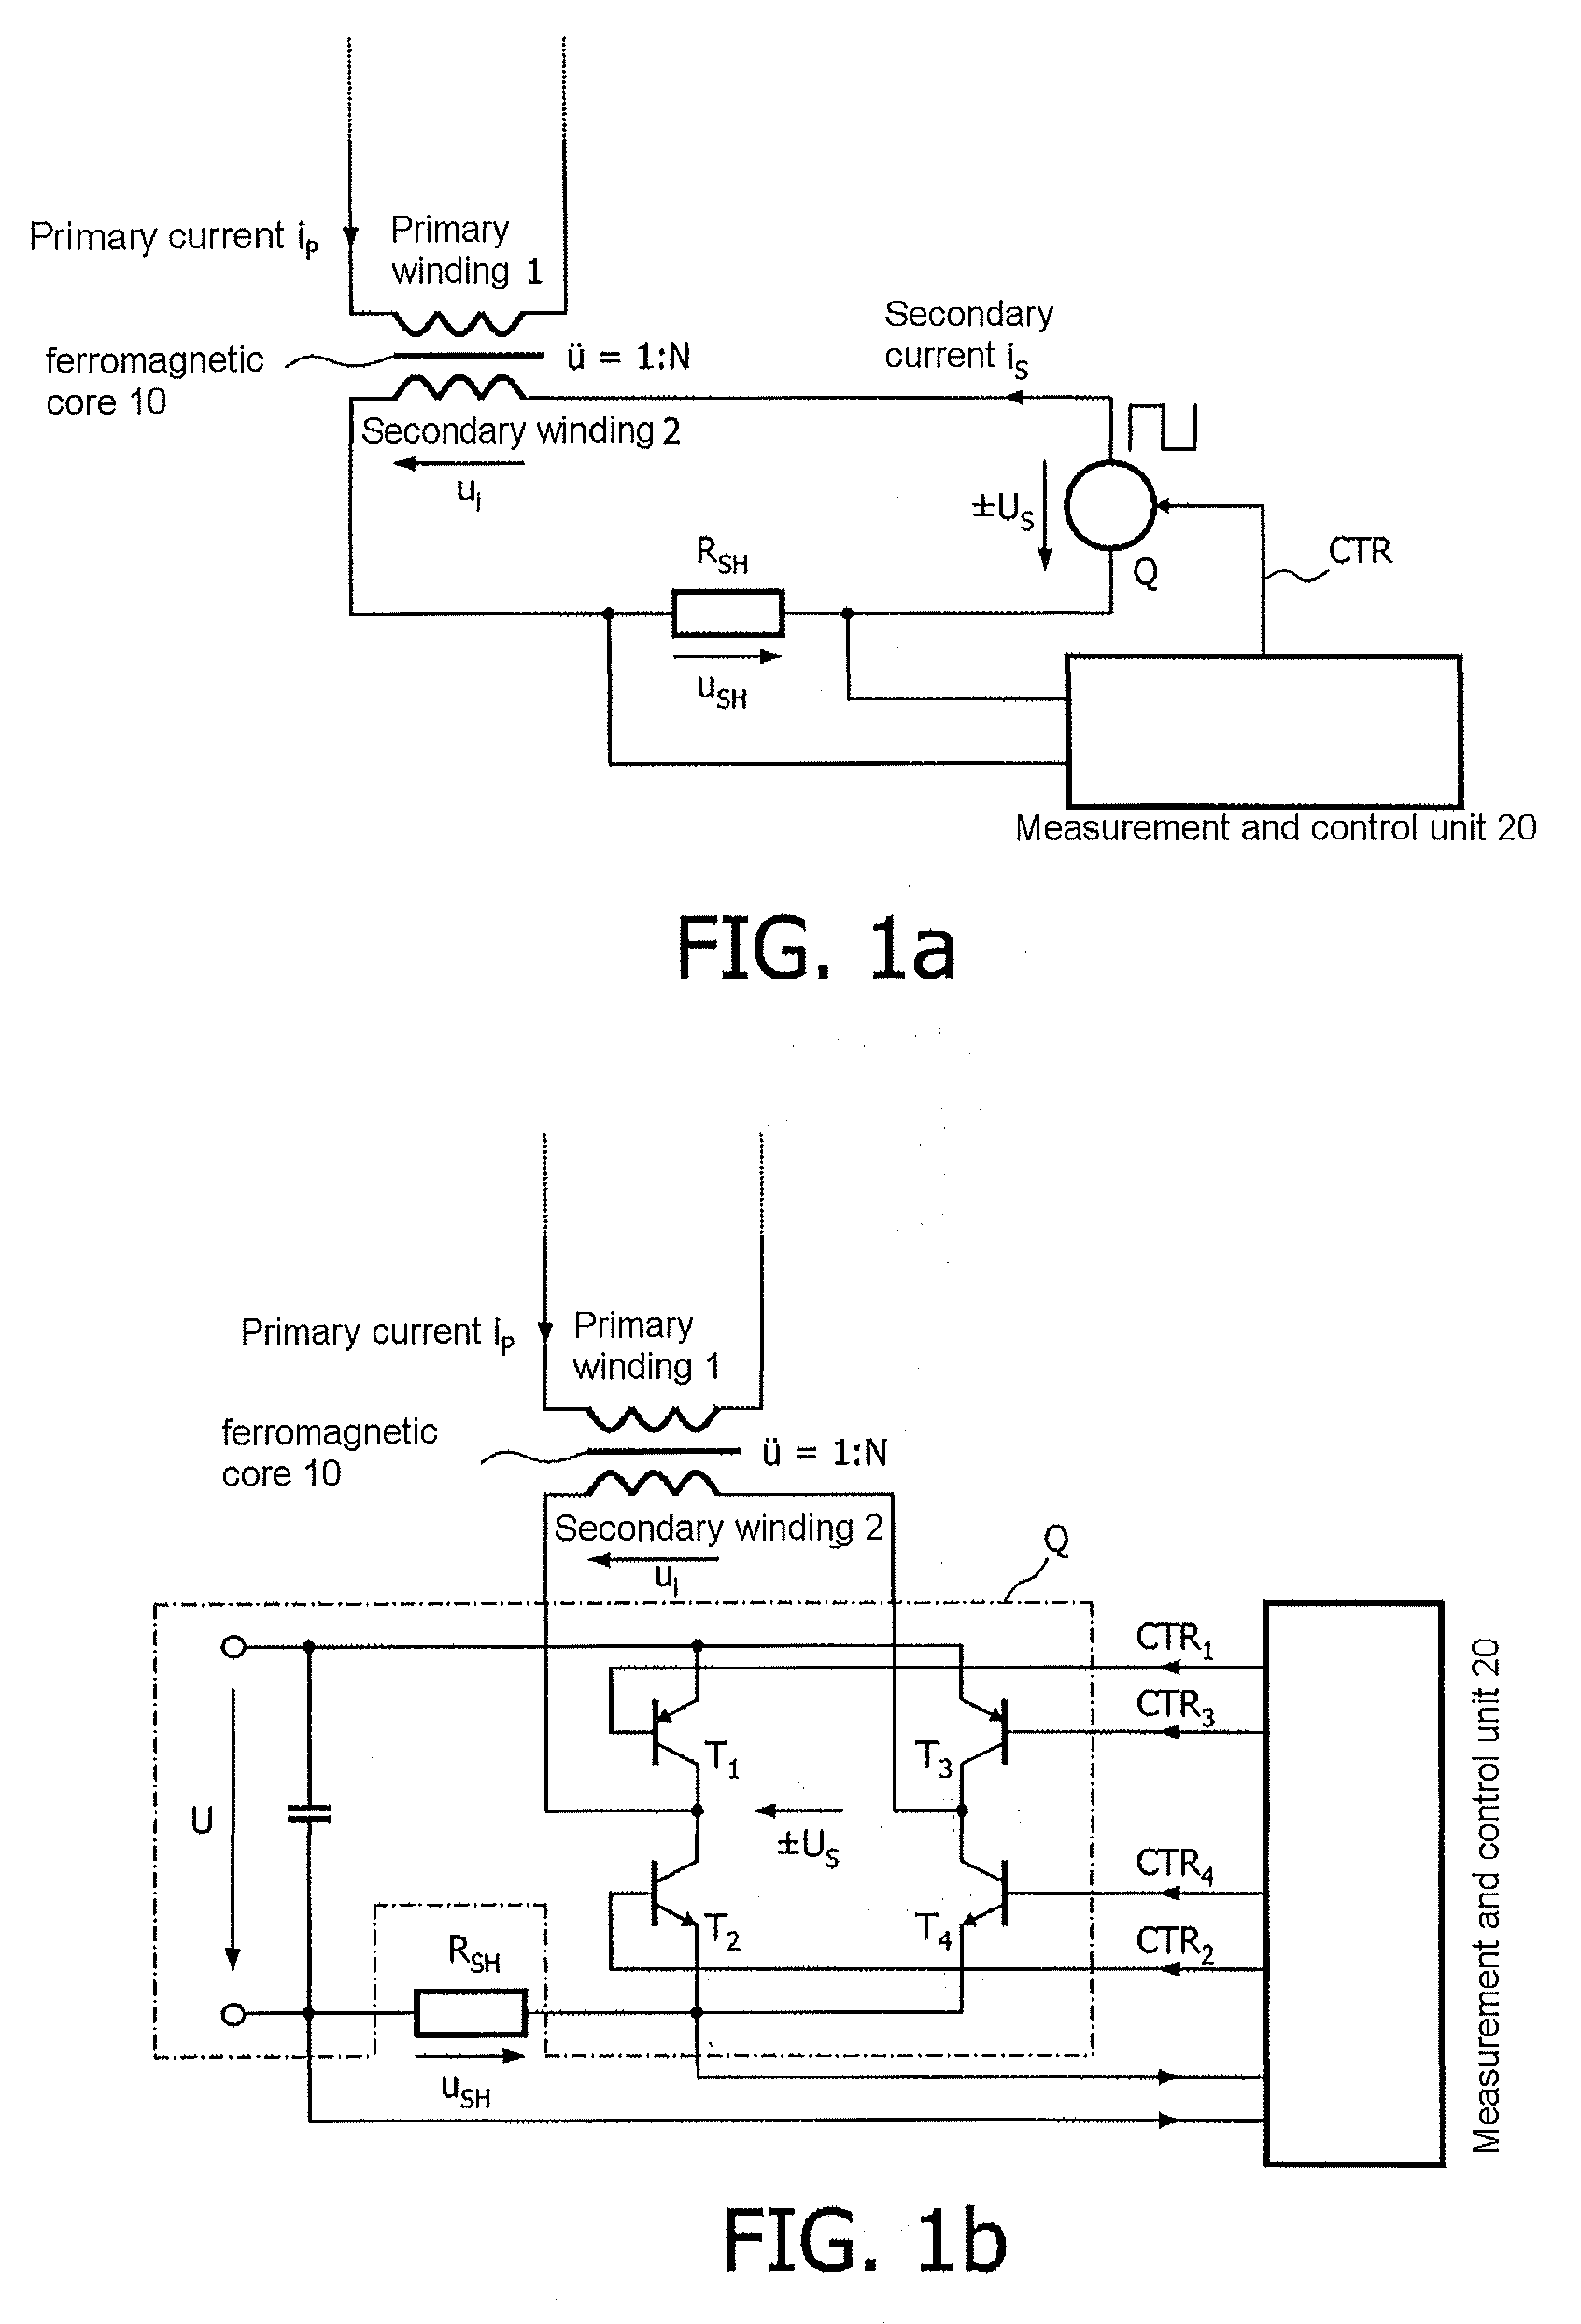 Current sensor arrangement for measurement of currents in a primary conductor